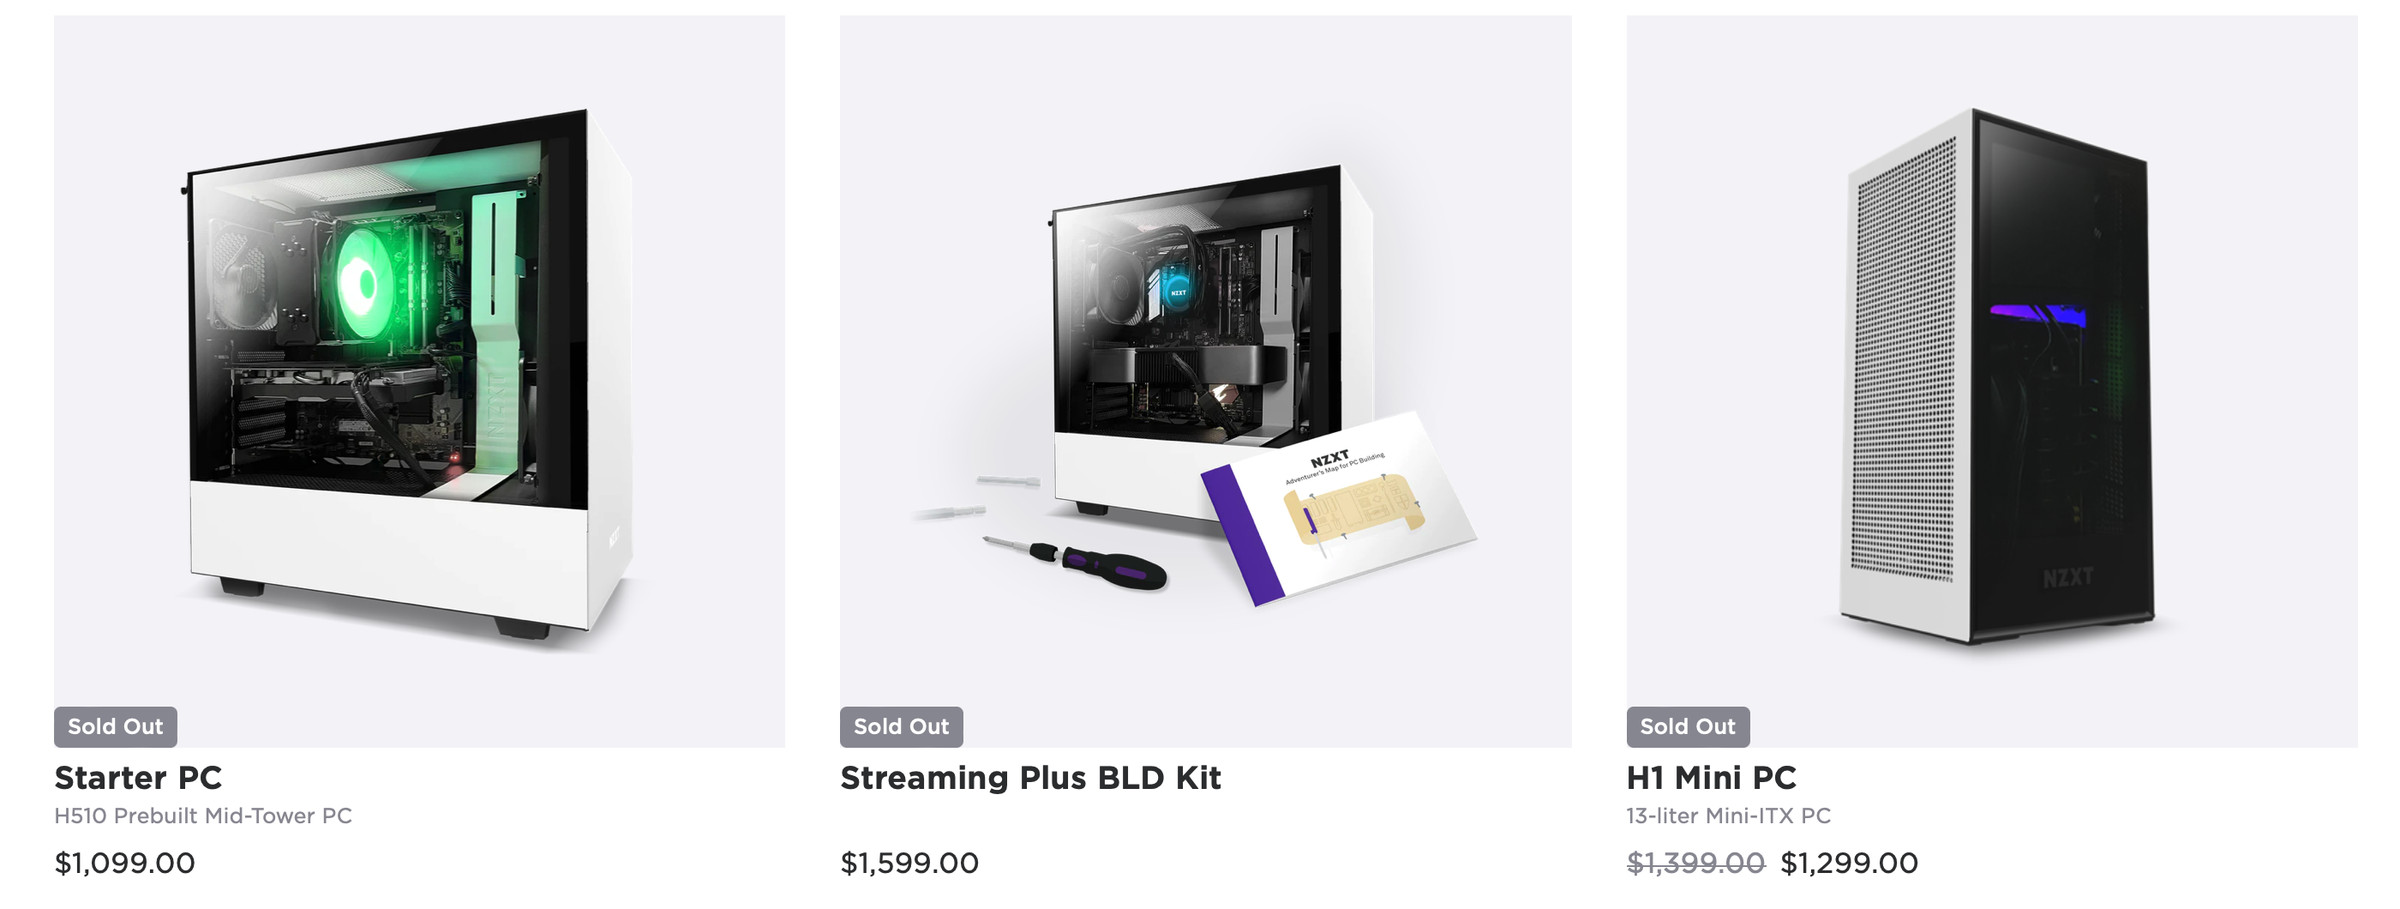 The state of NZXT’s other PCs.